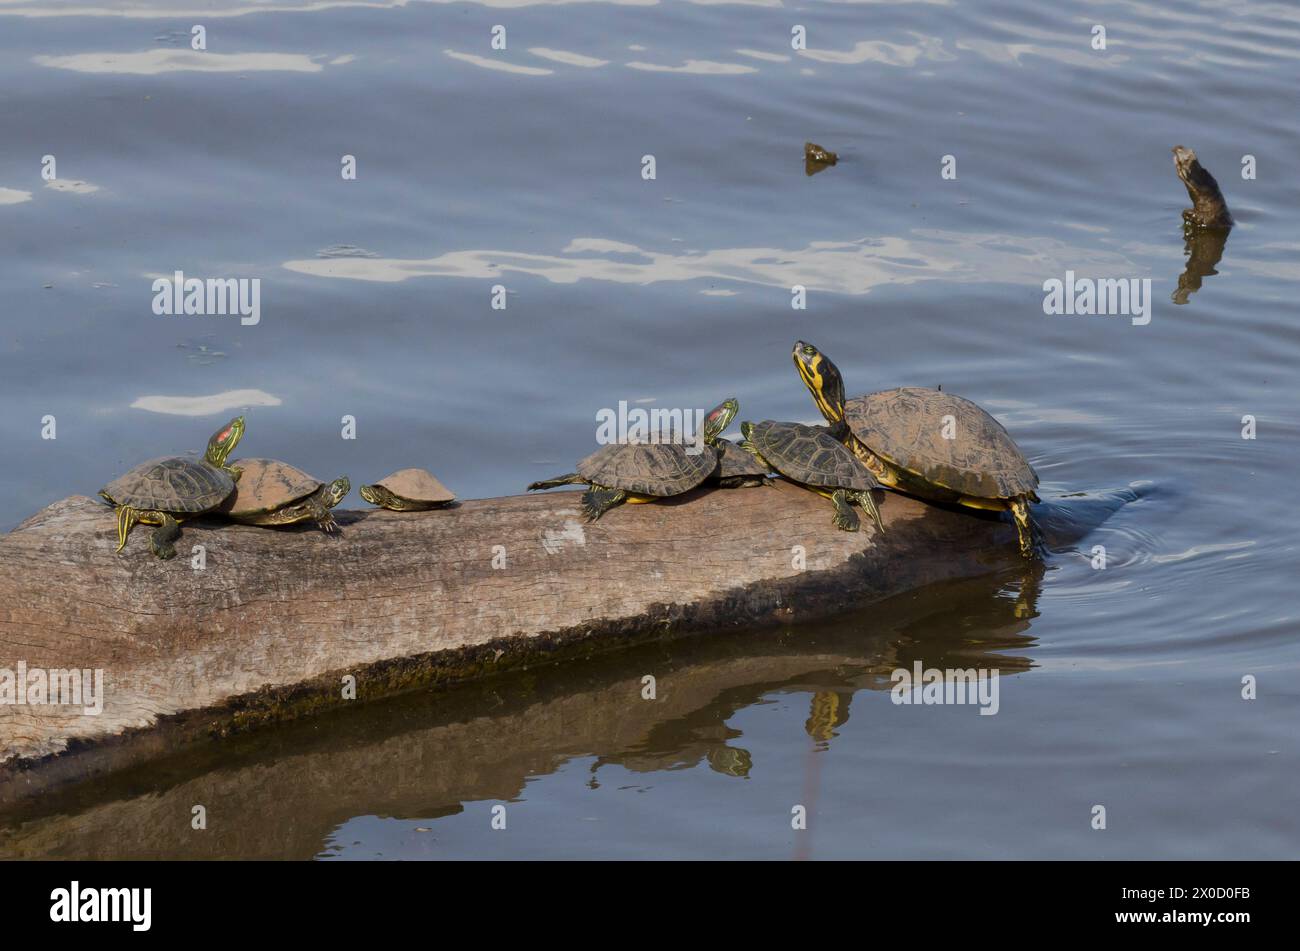 Red-eared sliders, Trachemys scripta elegans, Yellow-bellied Slider, Trachemys scripta, and Eastern River Cooters, Pseudemys concinna concinna Stock Photo